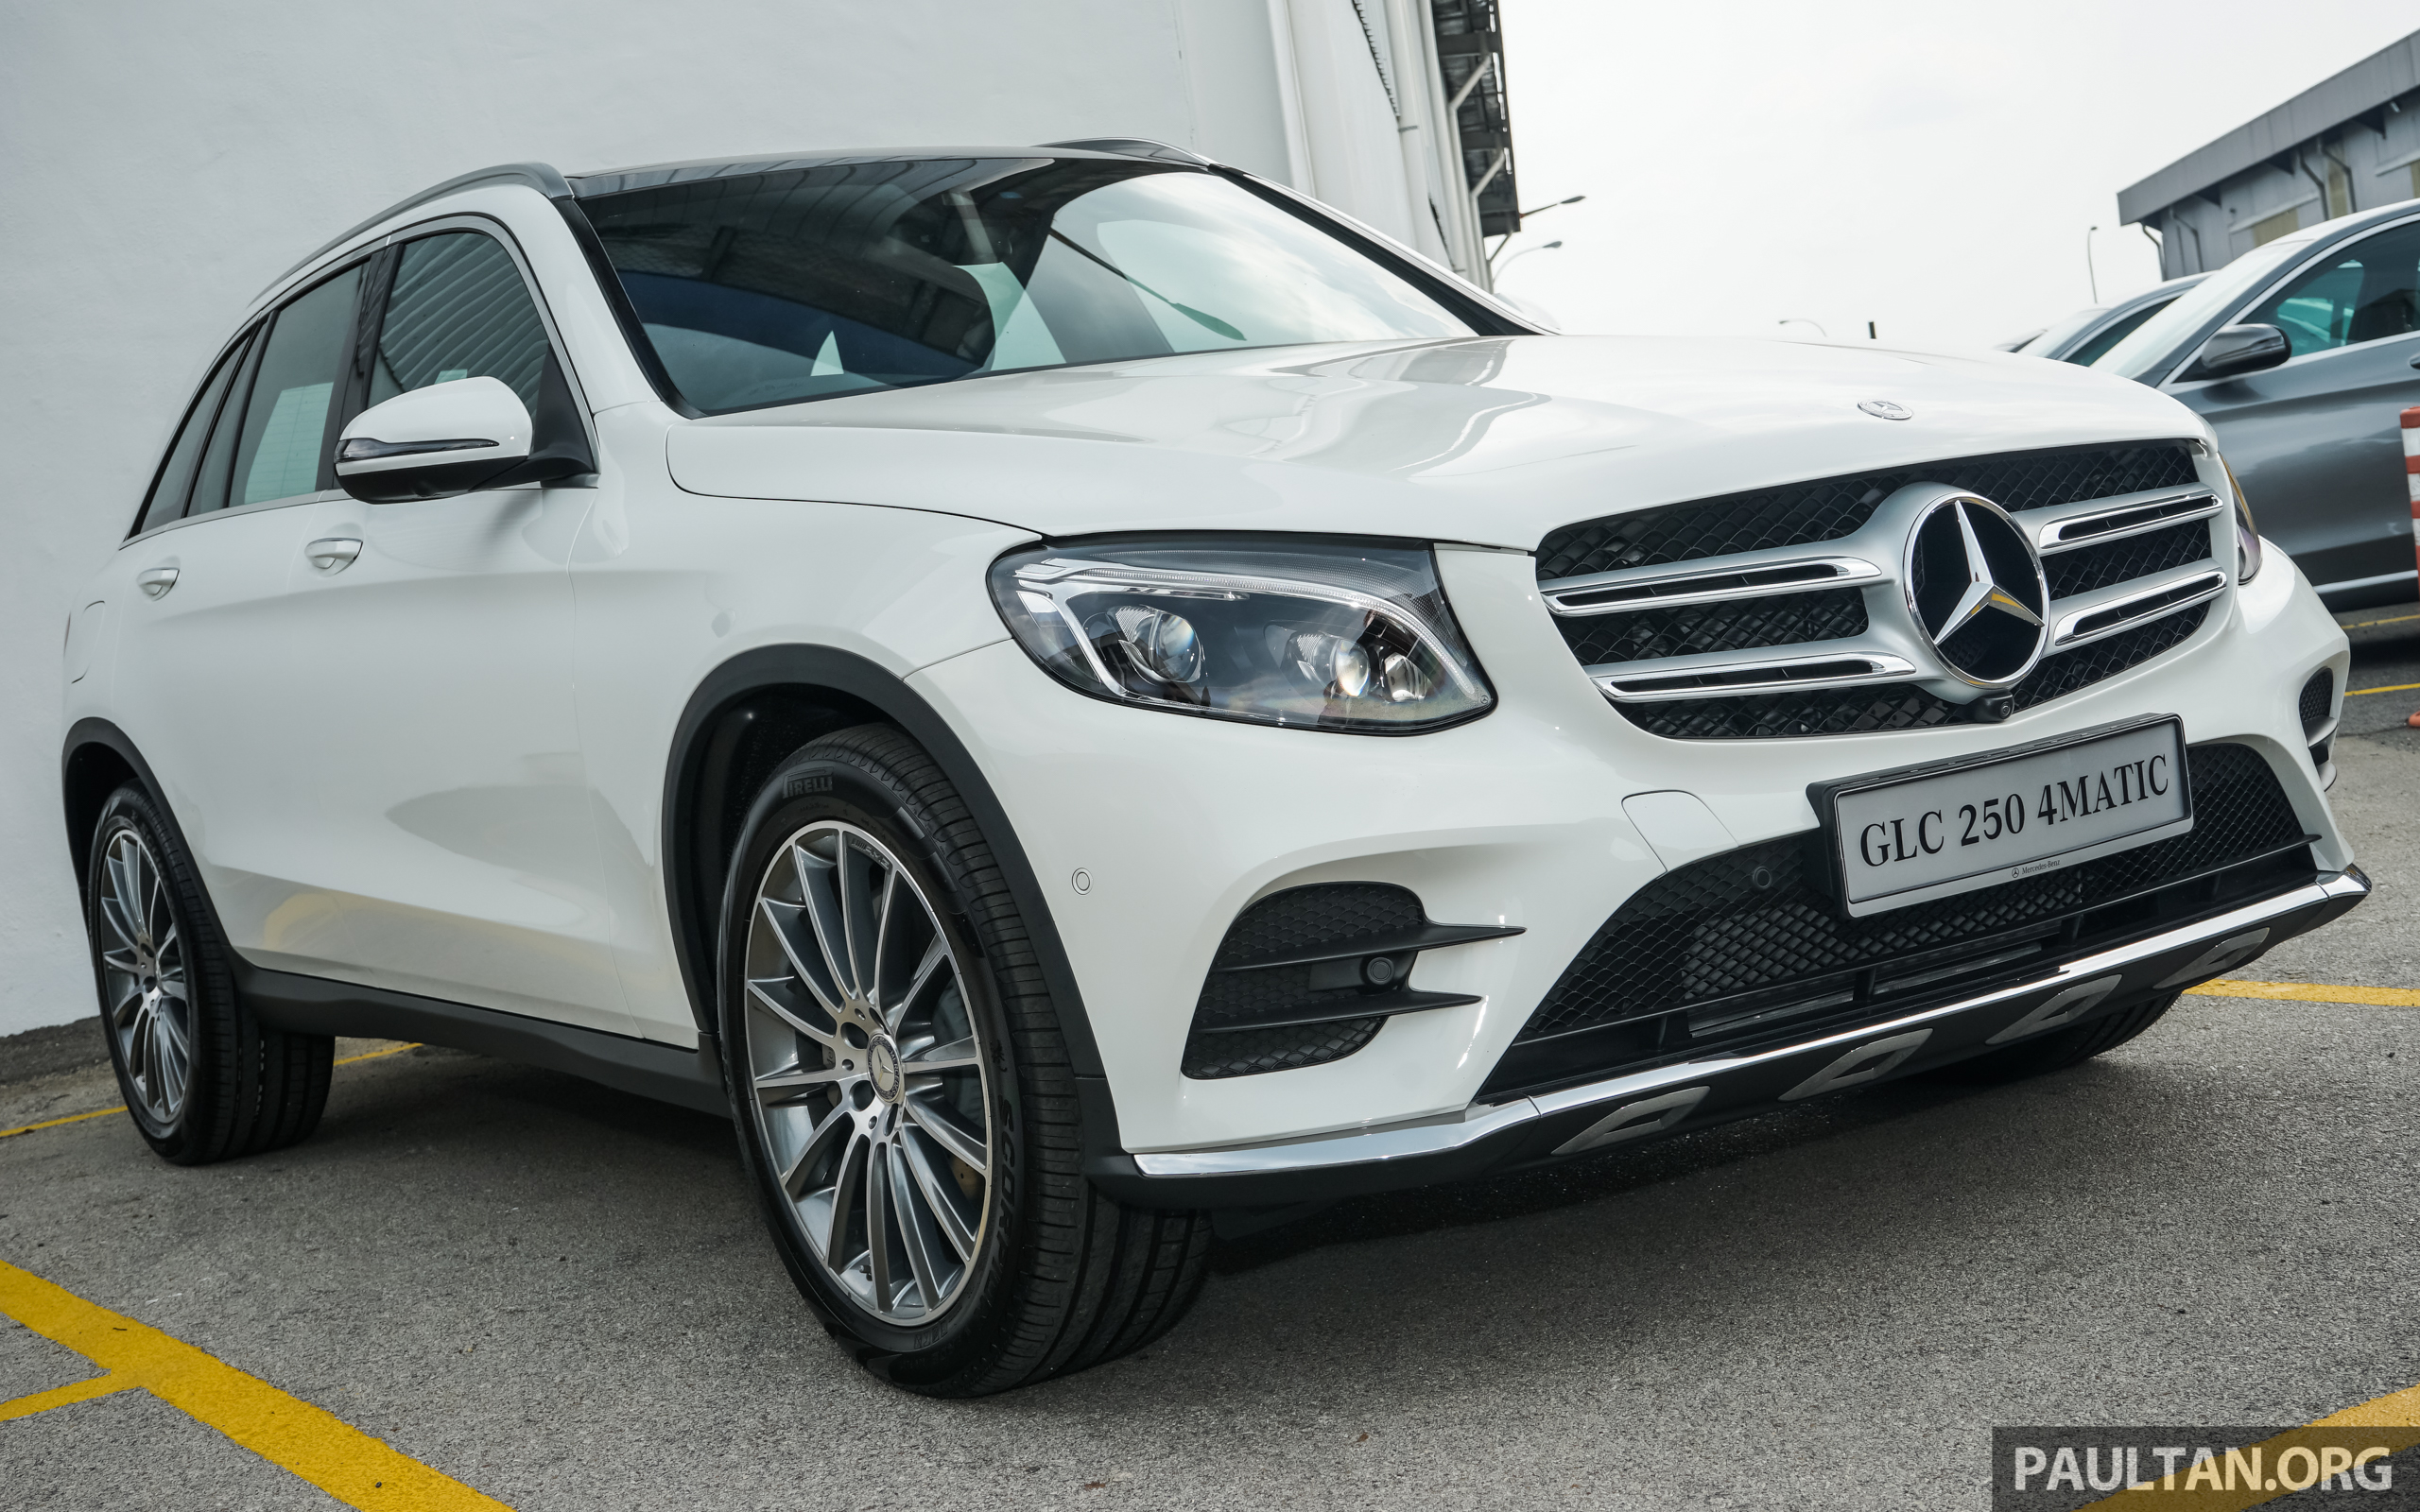 Mercedes-Benz GLC 250 SKD launched: AMG, RM326k